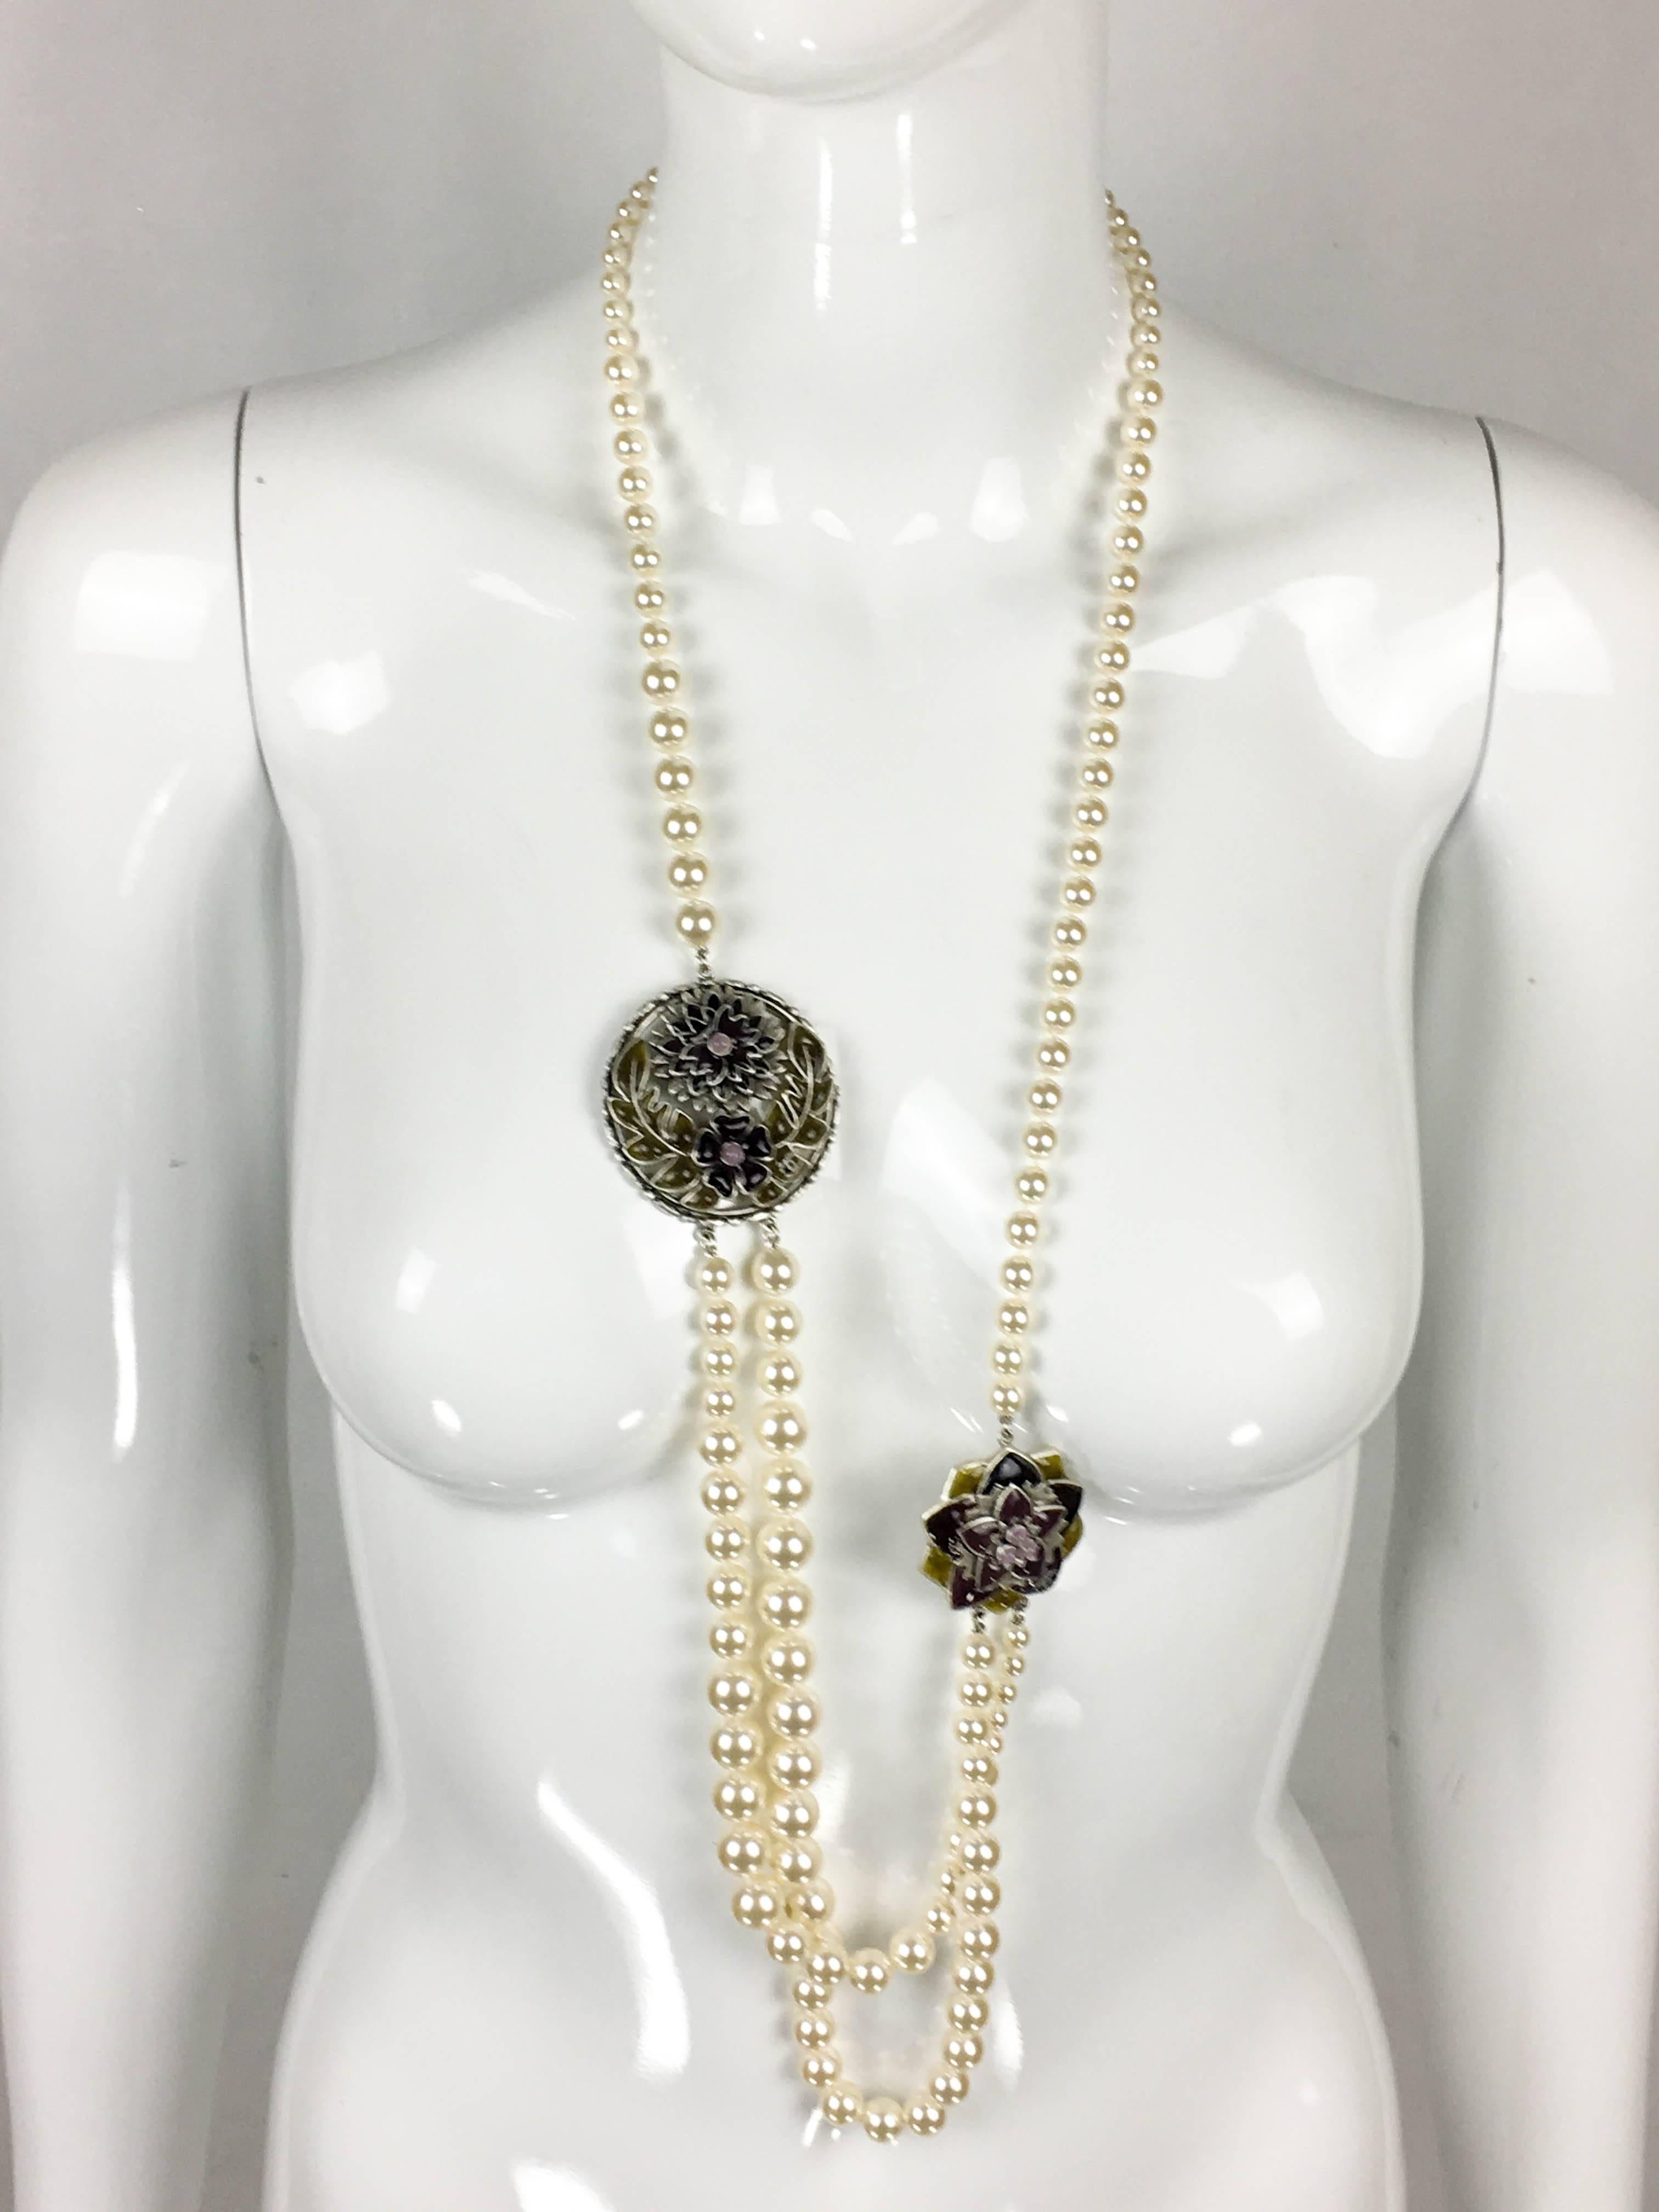 Chanel Pearl and Gripoix Sautoir. This gorgeous necklace by Chanel was crafted for the 2015 Autumn / Winter Collection. This long 2-strand graduated faux pearl sautoir features 2 medallions embellished with Gripoix (poured glass) creating floral